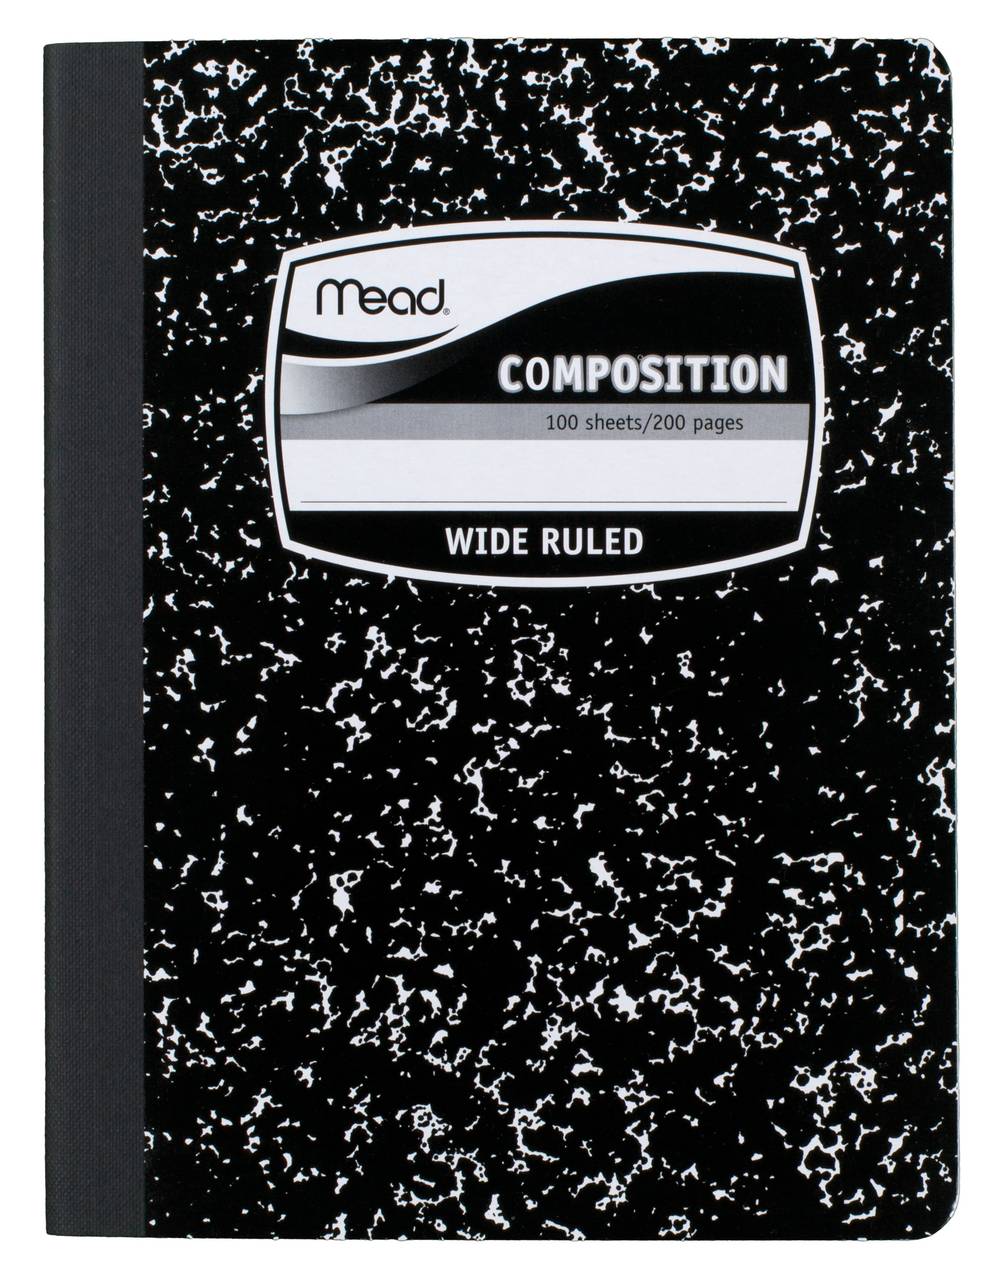 Mead Composition Wide Ruled Bookbound Sheets